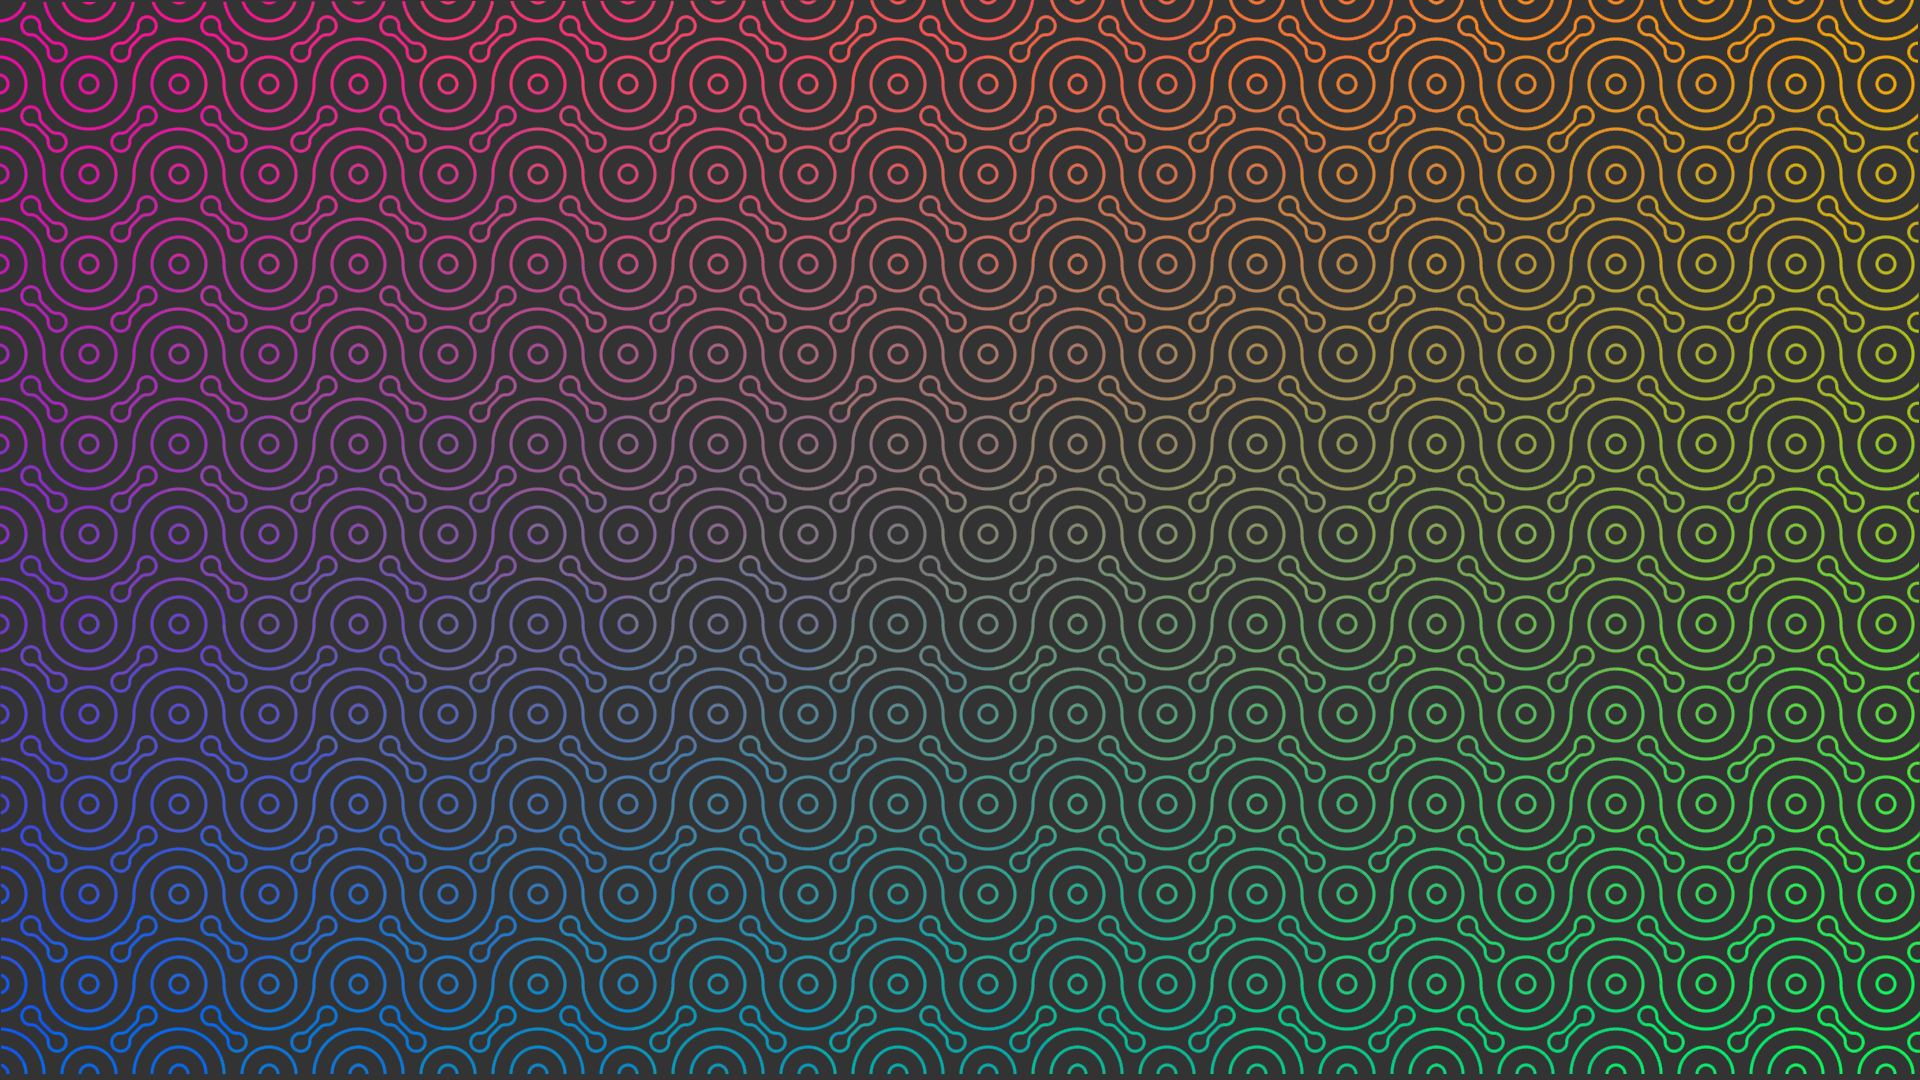 General 1920x1080 gradient pattern abstract